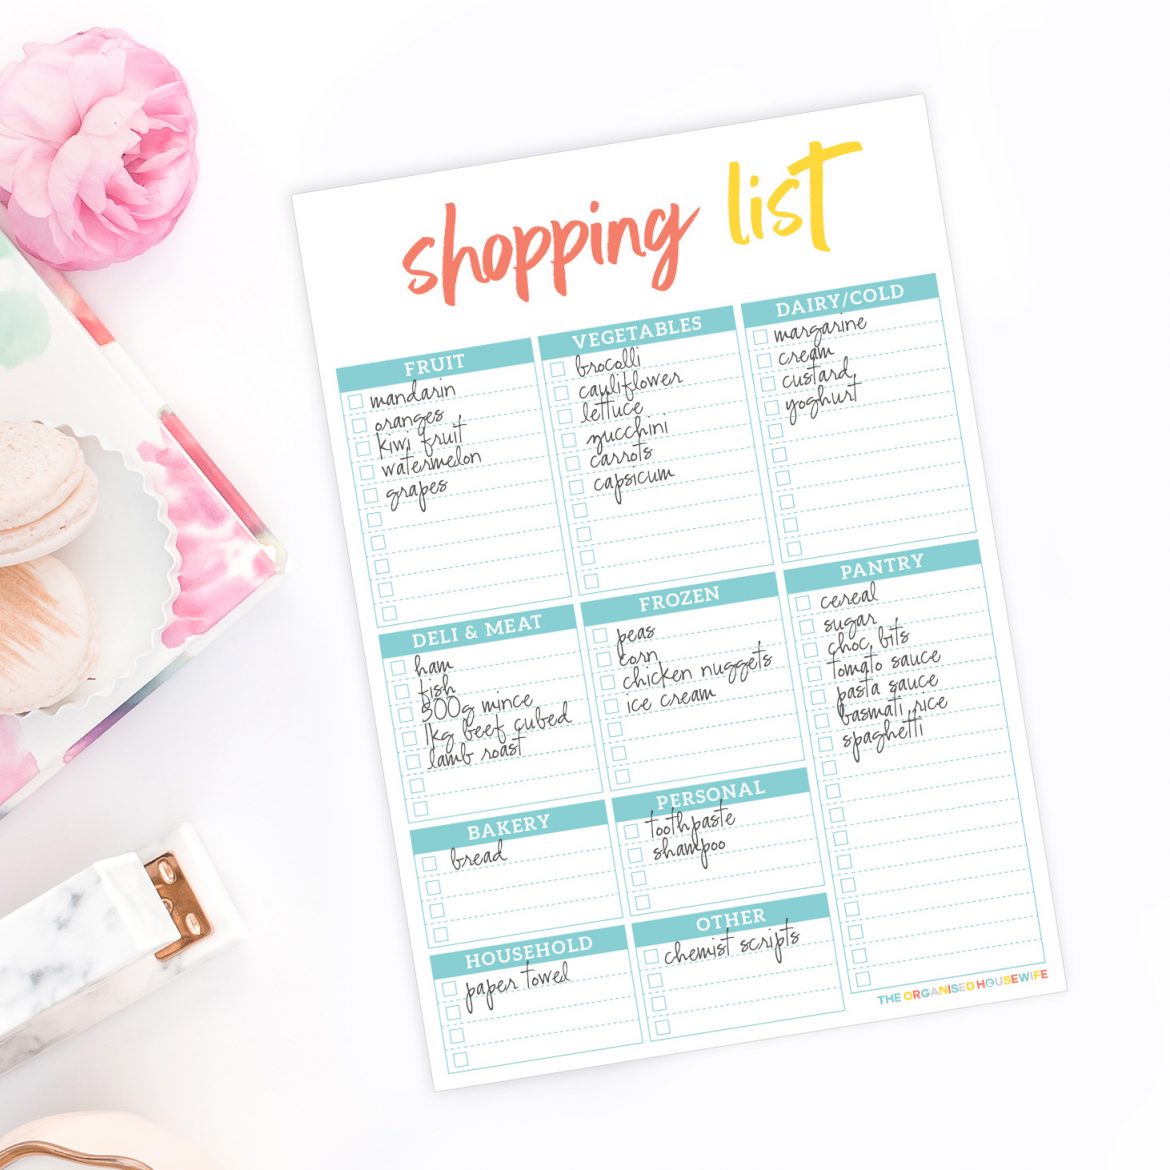 This ultra organised shopping list notepad will help you save time while walking up and down the aisles at the supermarket, listing all your required groceries in the provided categories.